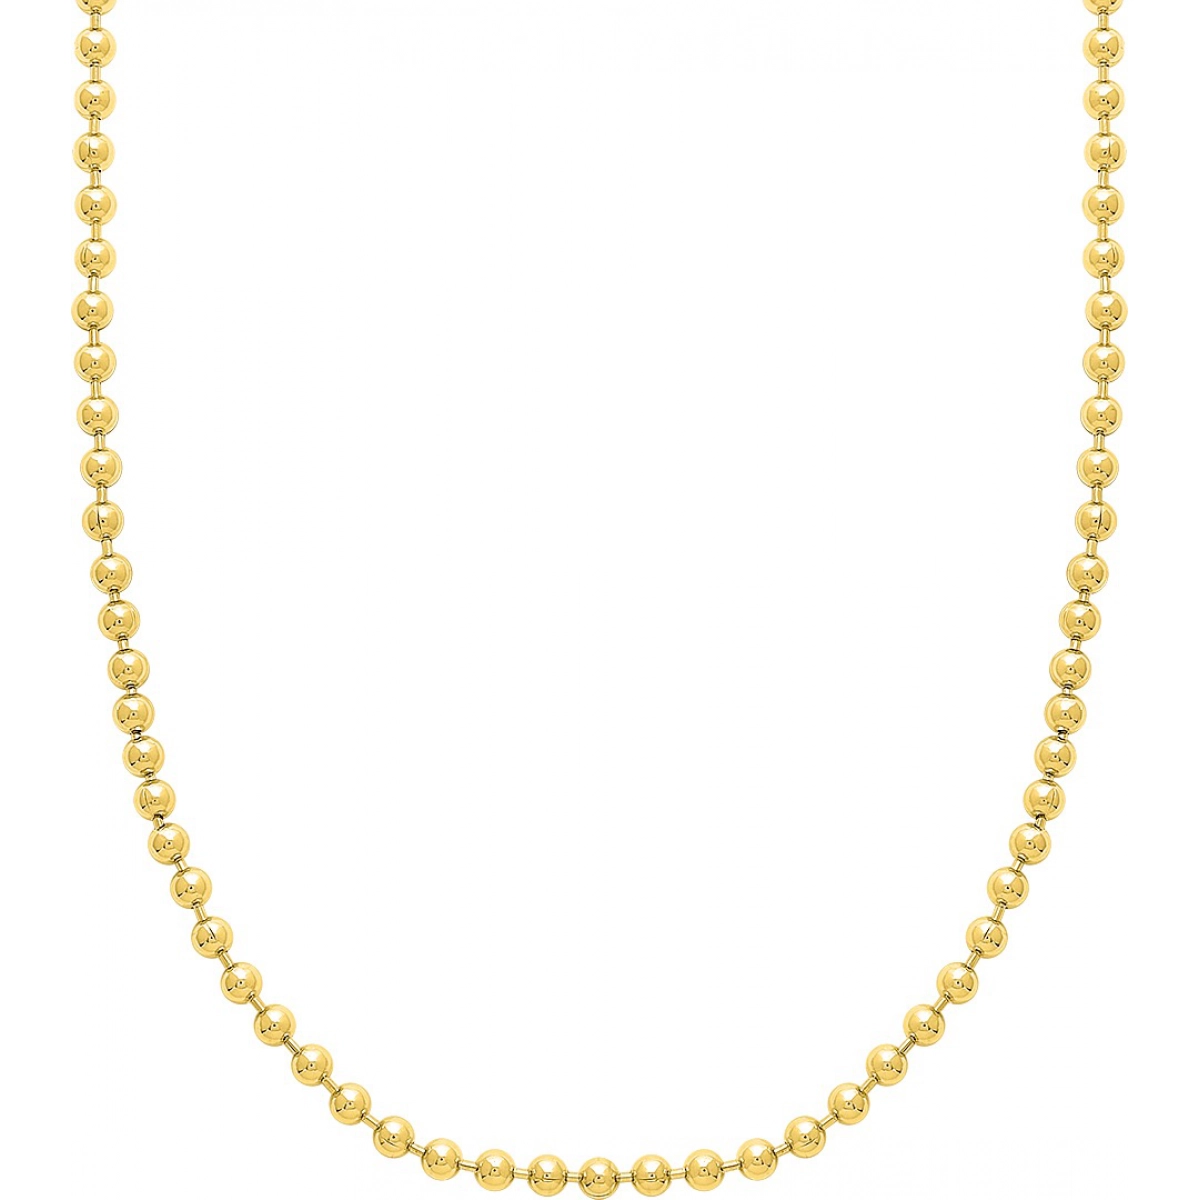 Hollow chain gold plated Brass Lua Blanca  254586J - Size 42